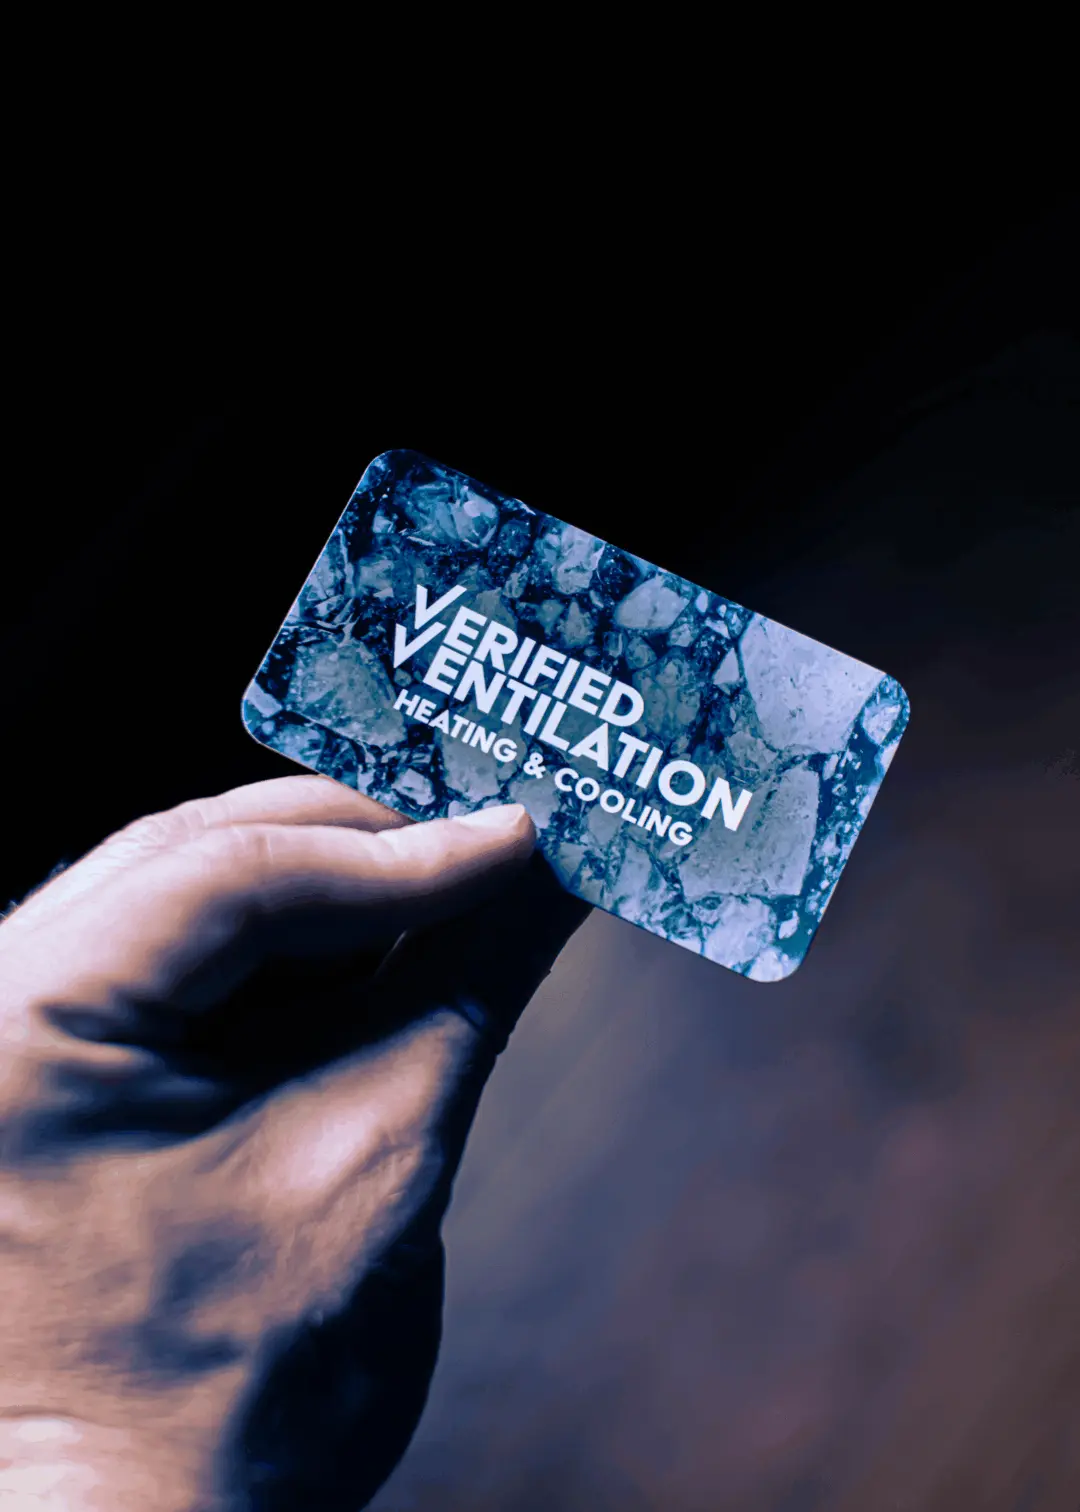 An animated view of the Verified Ventilations Business Card. This animated image shows the business card being flipped to the front or back of the card.